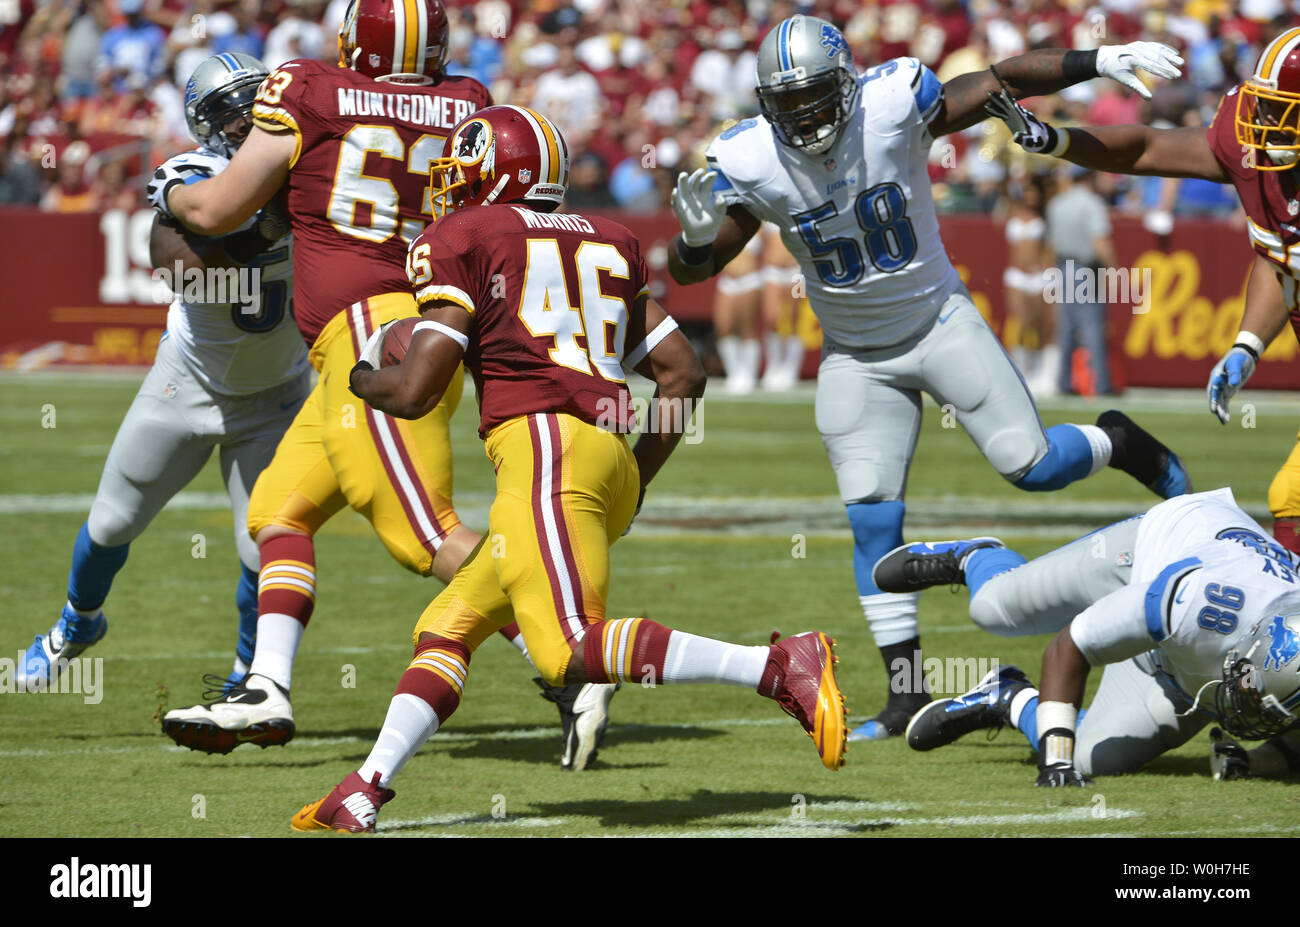 Washington Redskins running back Alfred Morris (C) looks for running room as he follows offensive lineman Will Montgomery as Detroit Lions linebacker Ashlee Palmer pursues, during 1st quarter at FedEx Field, Landover Maryland, September 22, 2013. The Lions won, 27-20, and the Redskins fell to 0-3 to open the season.  UPI/Mike Theiler Stock Photo